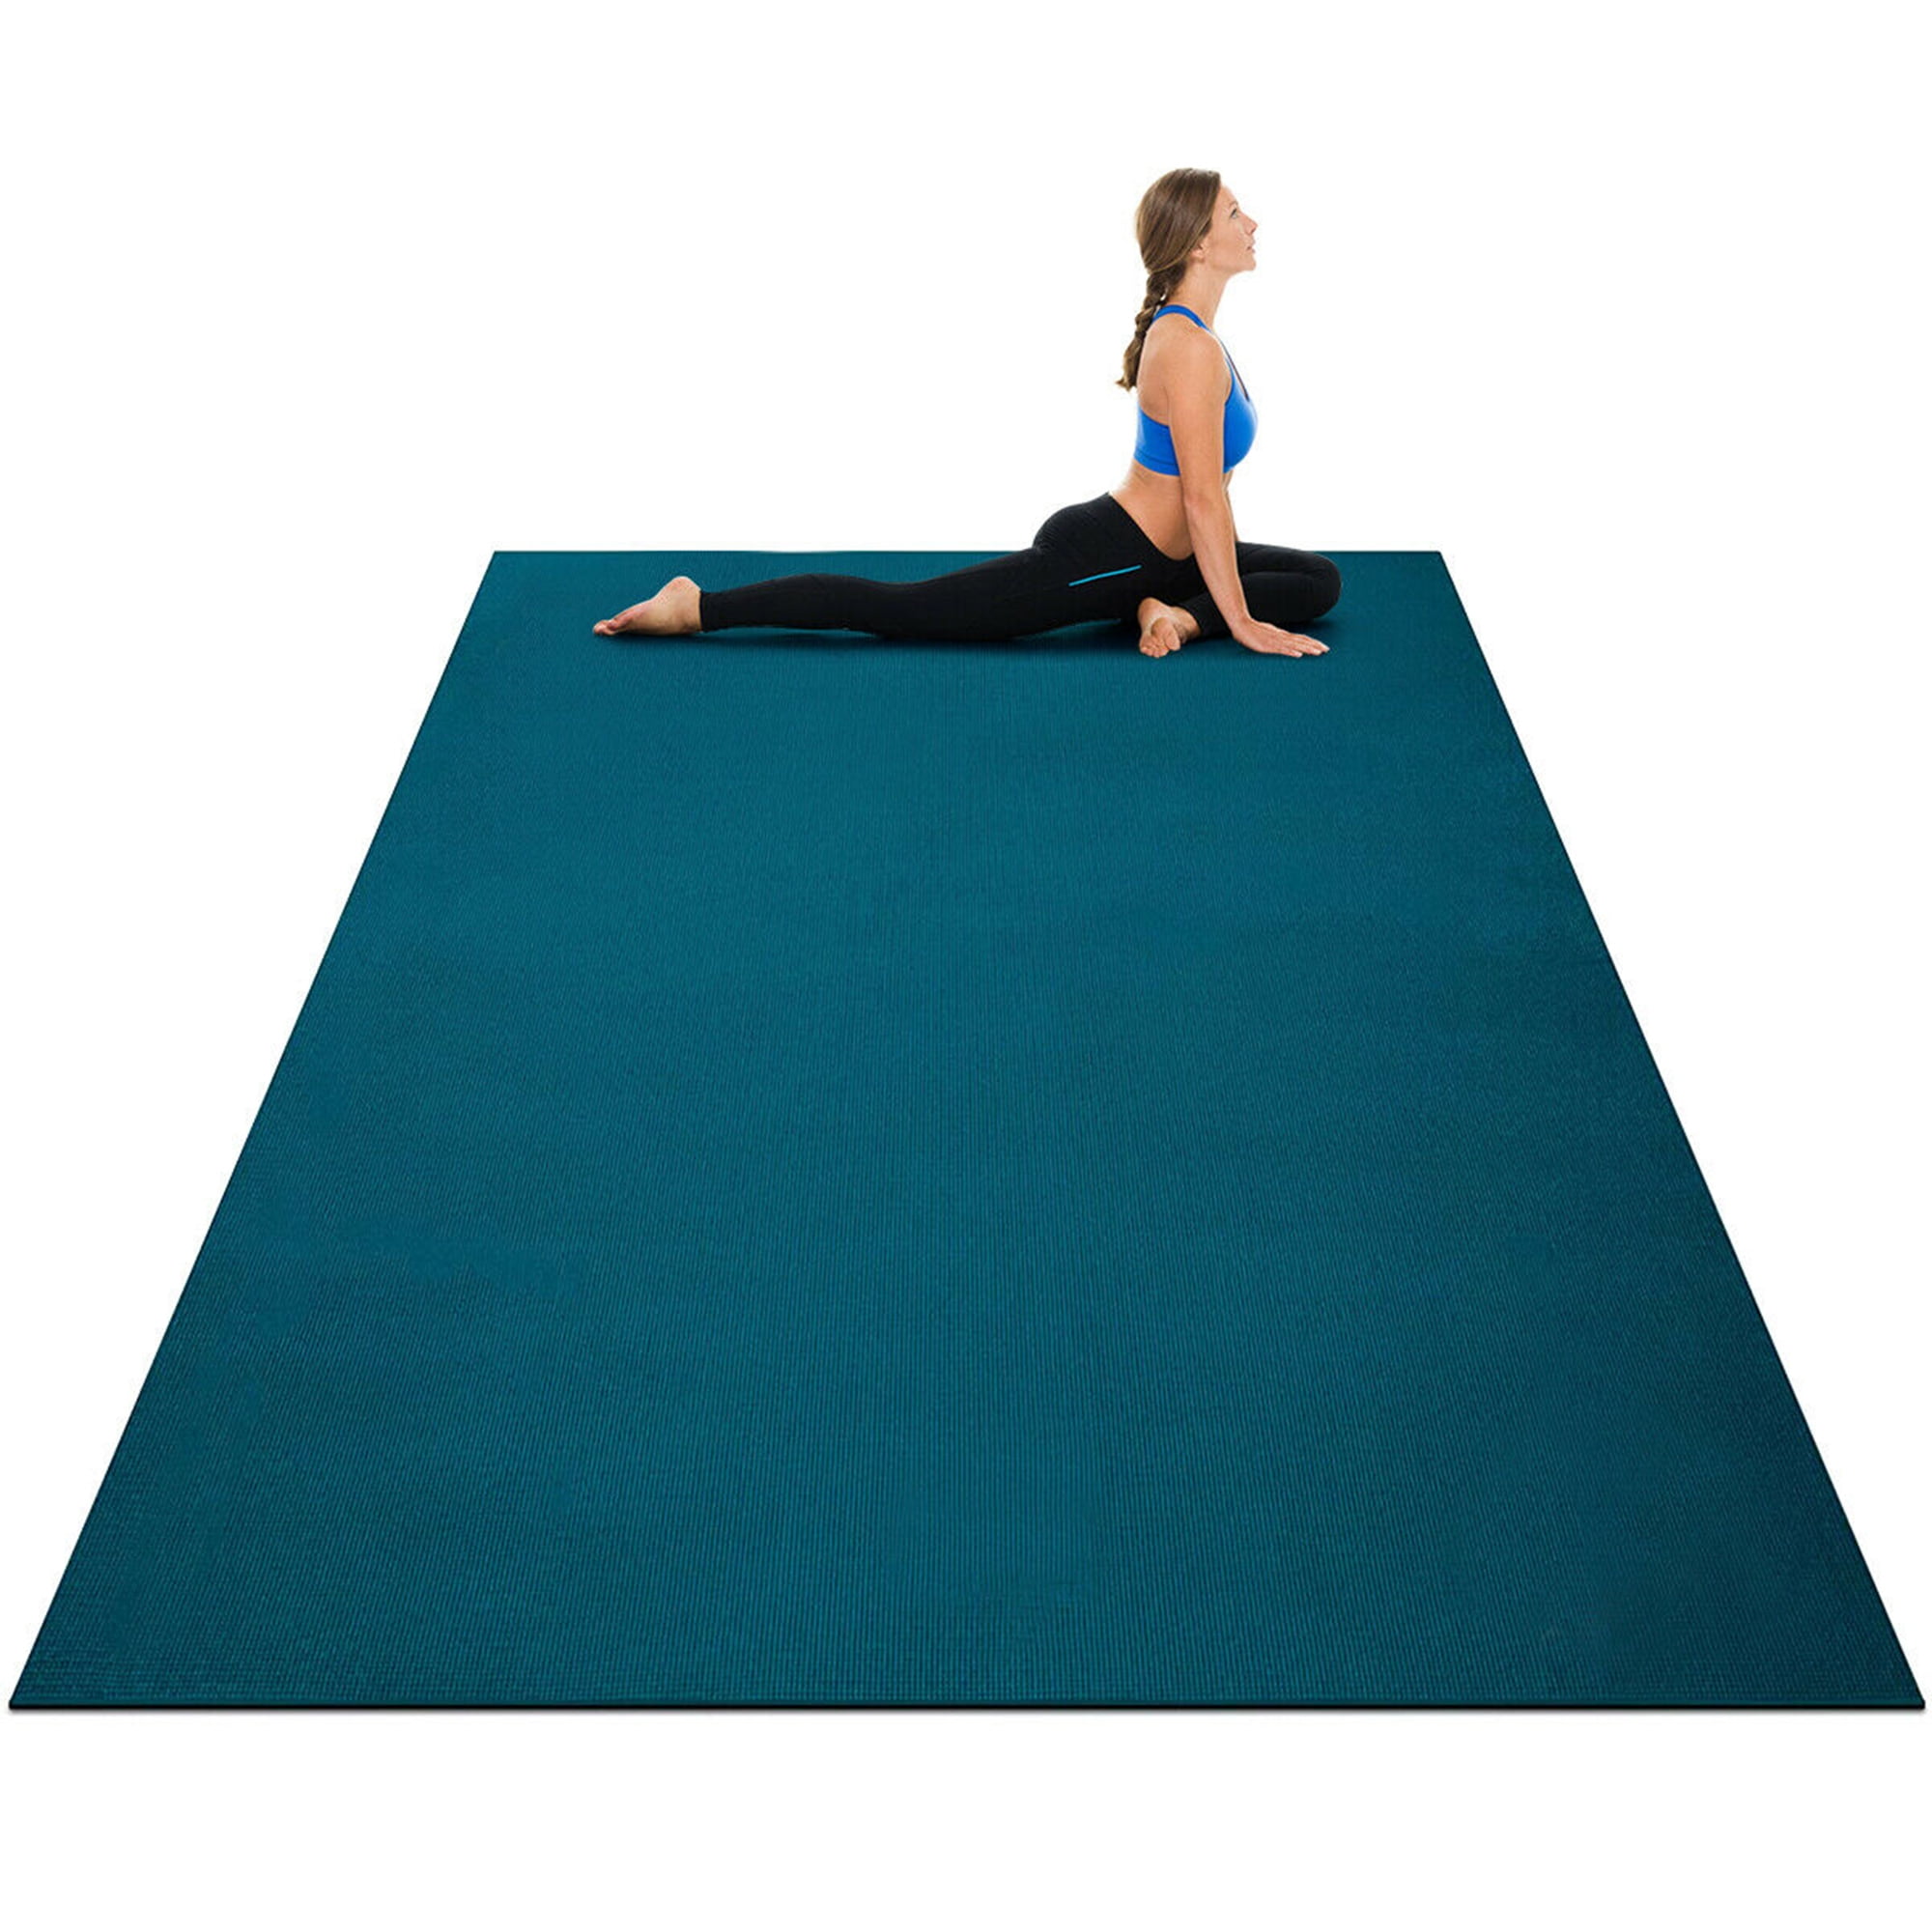 Premium Large Yoga Mat 7 x 5' x 8mm Extra Thick Wide Long Exercise Workout Floor 